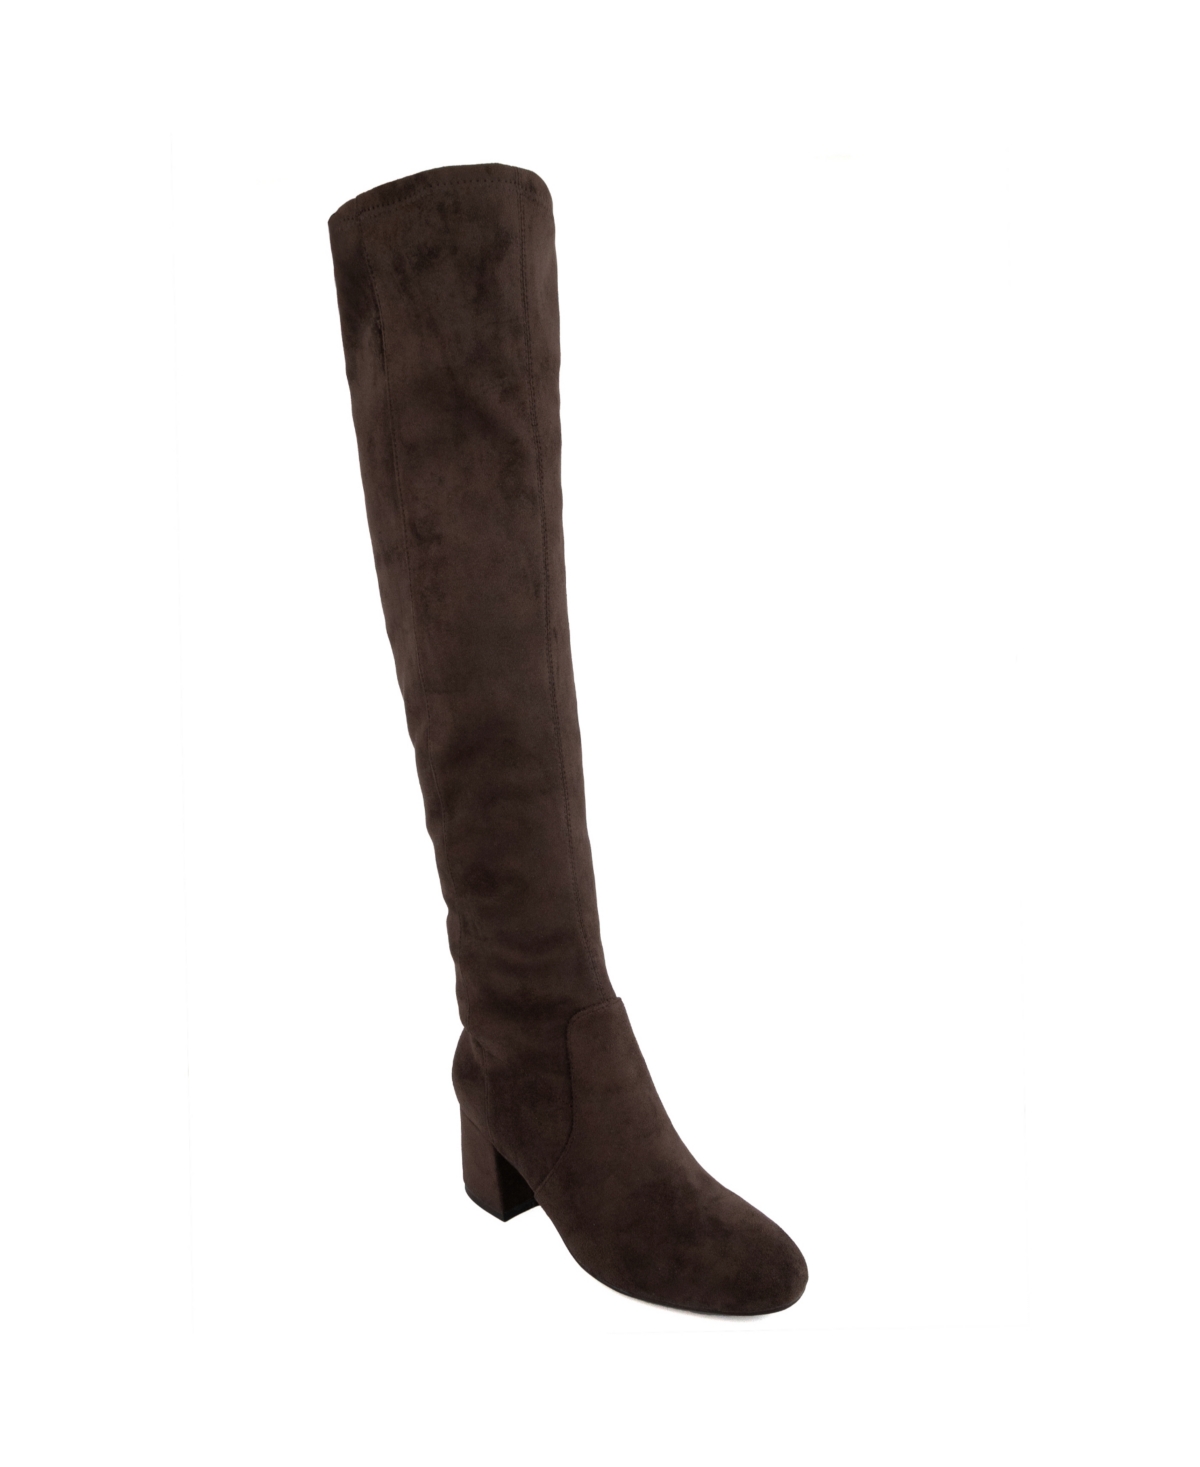 Women's Ollie Over The Knee High Calf Boots - Brown Stretch Microsuede